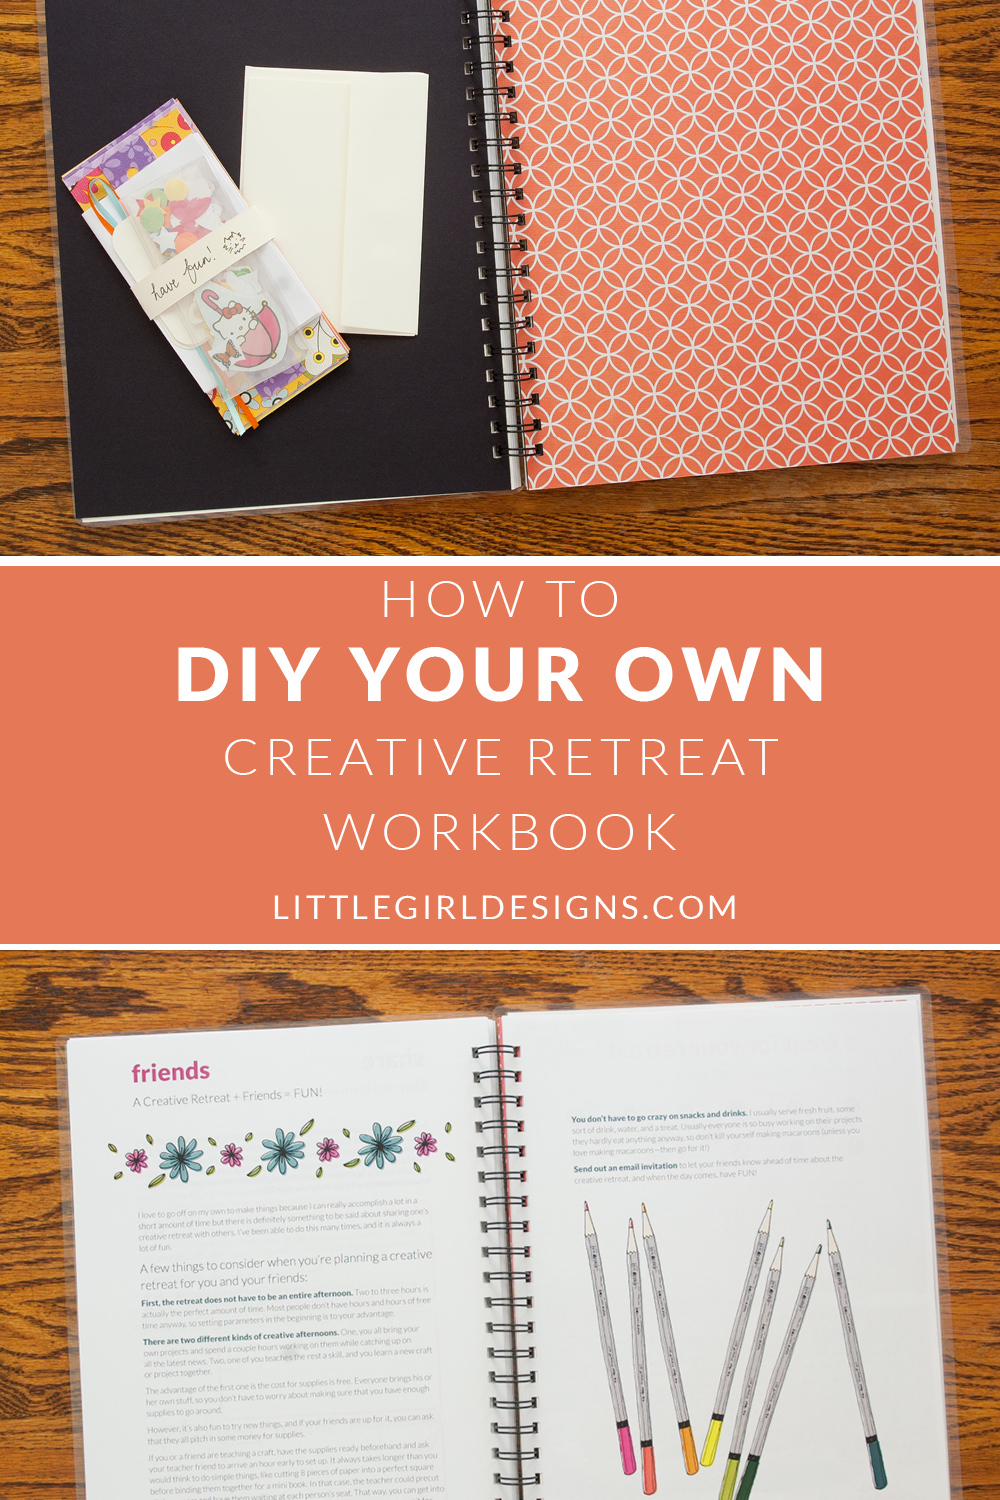 How to DIY Your Own Creative Retreat Workbook